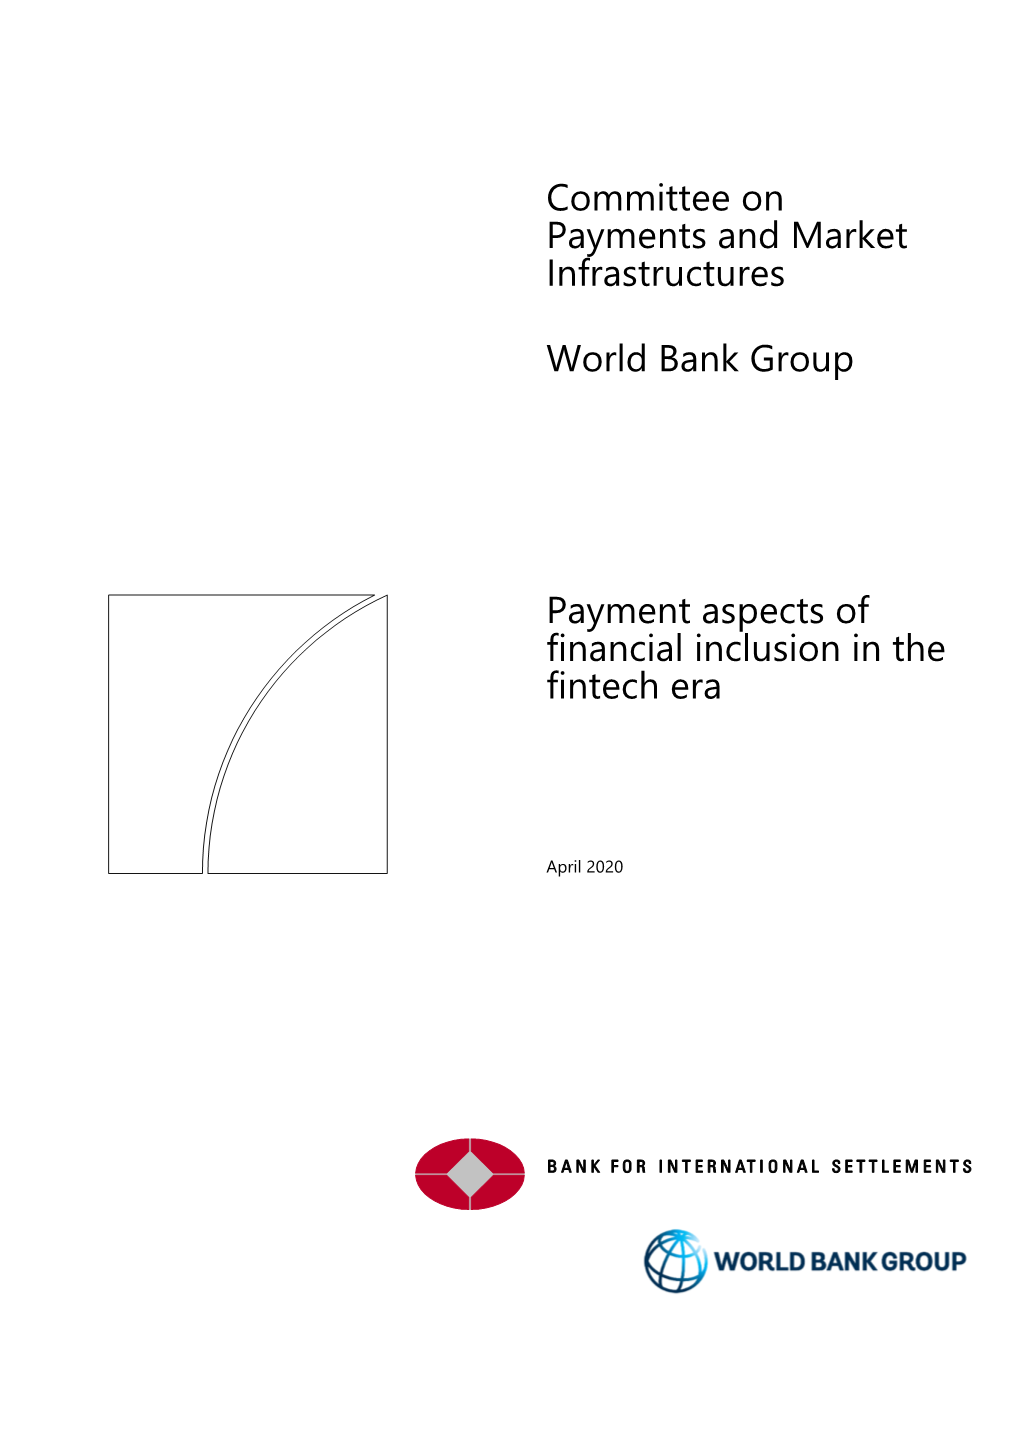 Payment Aspects of Financial Inclusion in the Fintech Era